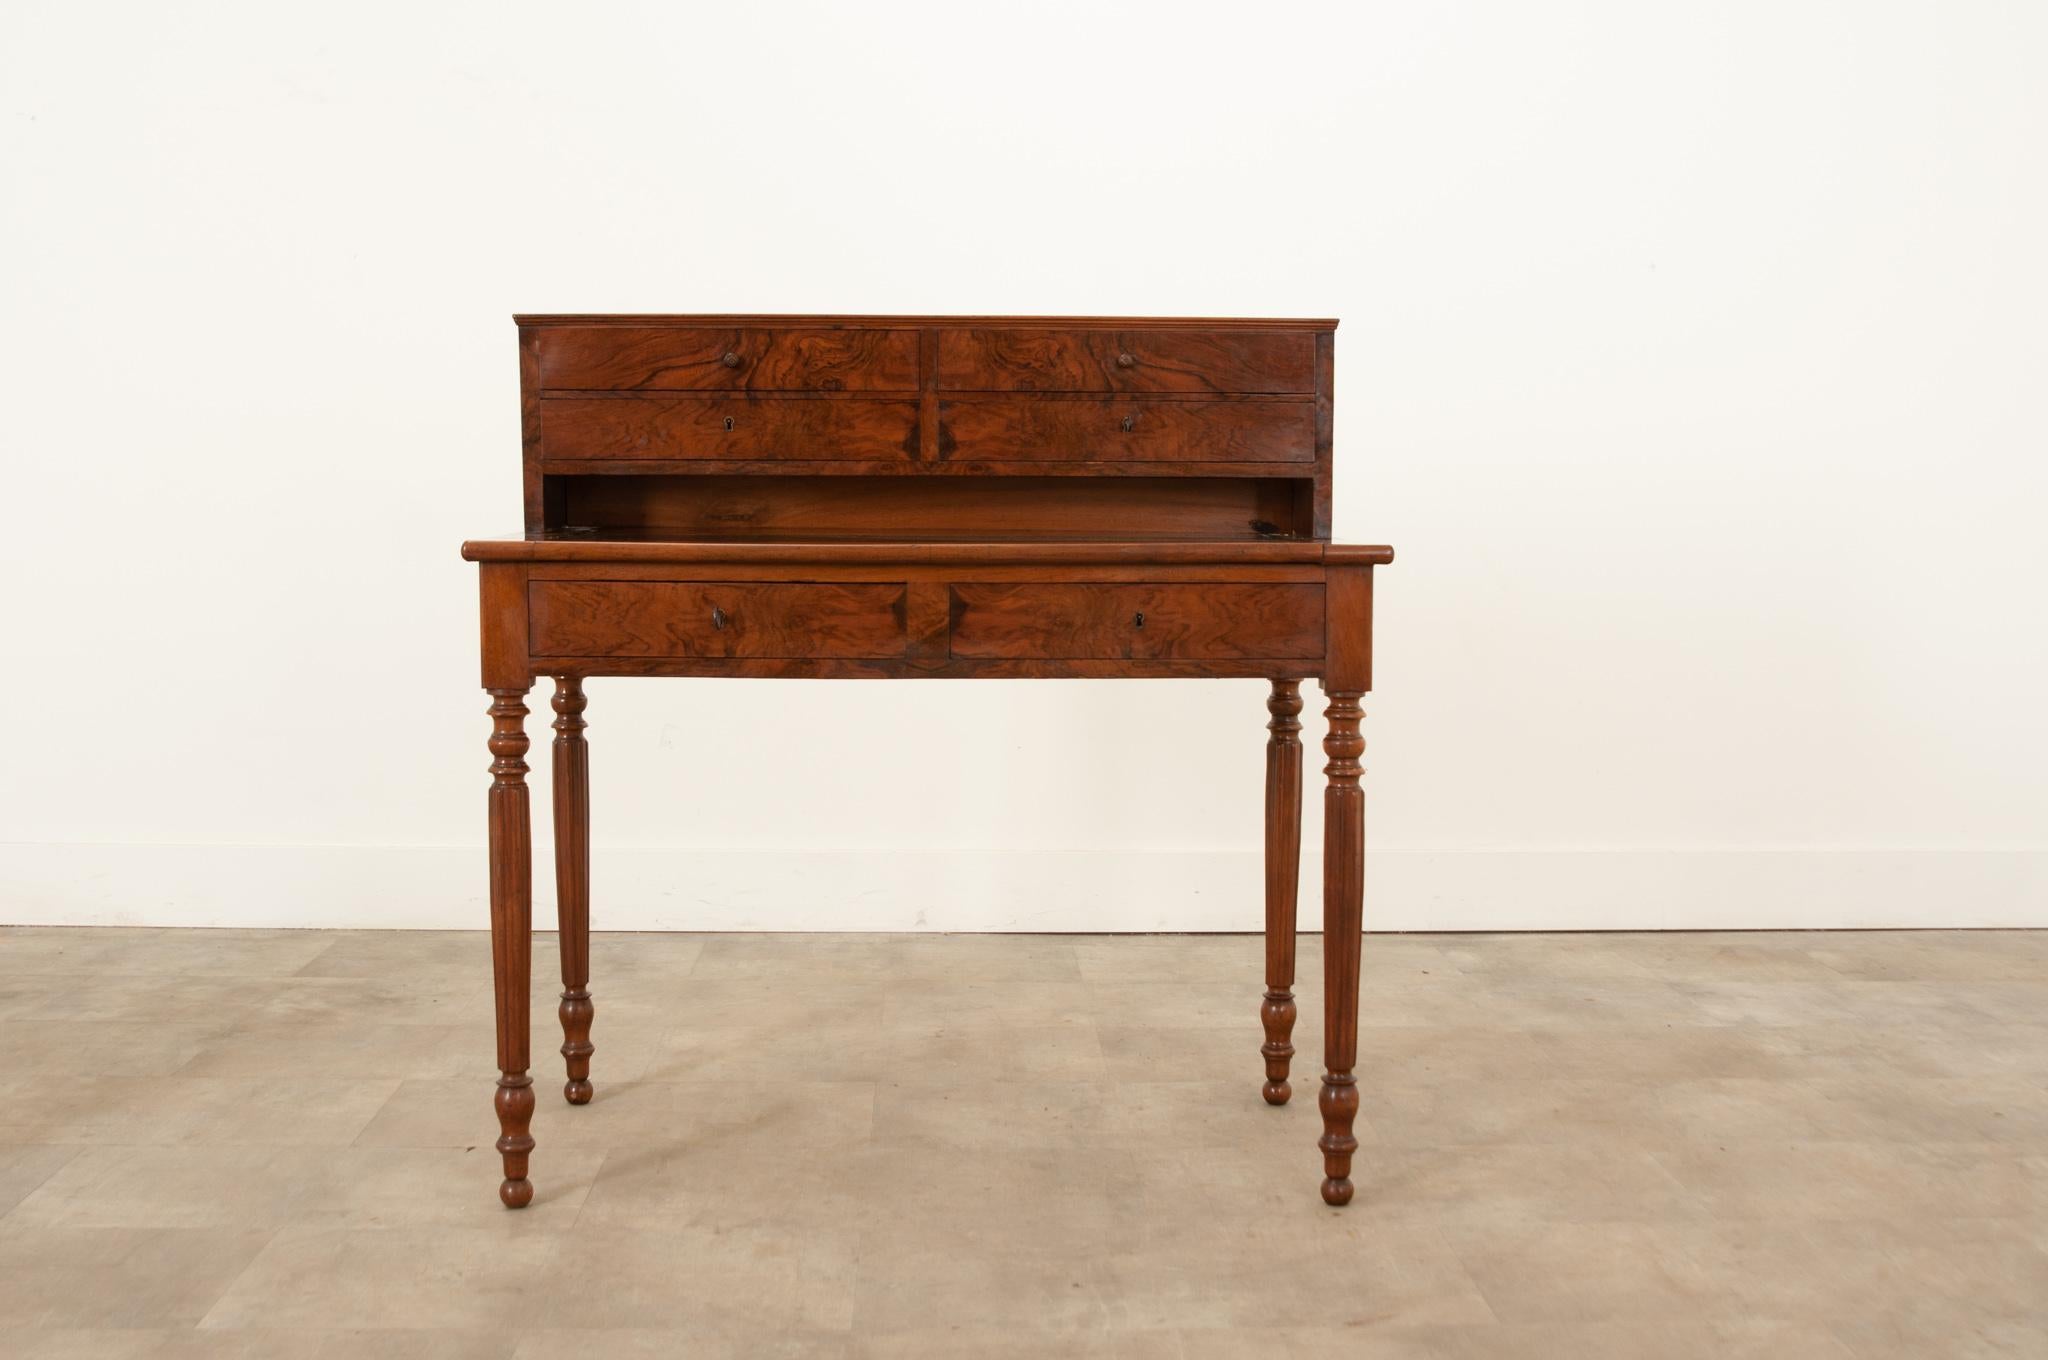 A petite antique mahogany correspondence desk that was hand-crafted in France circa 1850. Elegant and in excellent condition this desk delights with its linear shape and hand-carved details. A sleek upper console is arranged with four drawers above